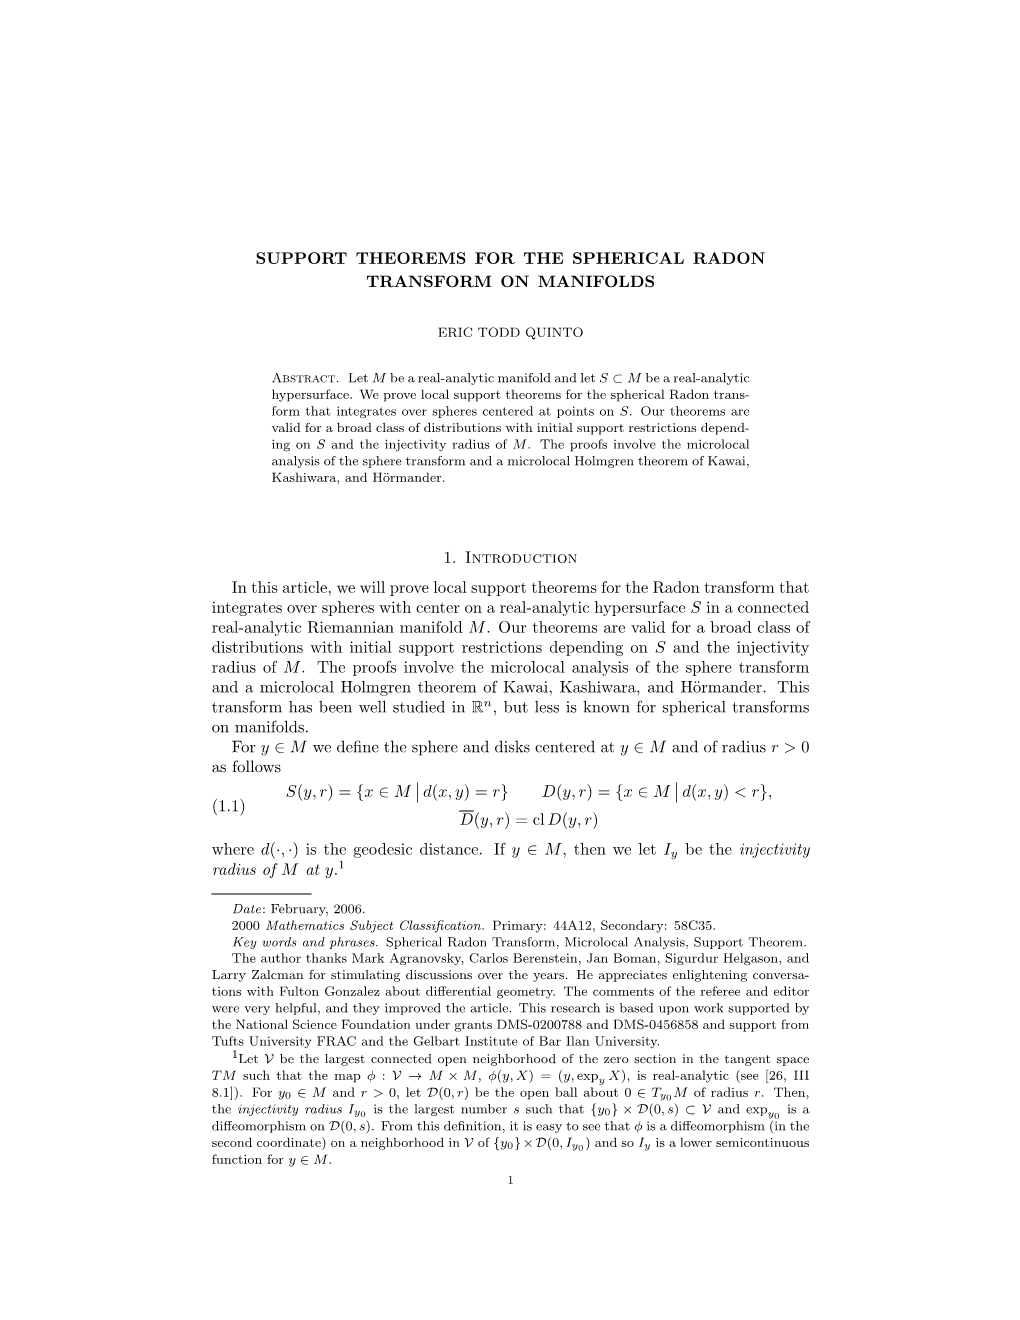 Support Theorems for the Spherical Radon Transform on Manifolds